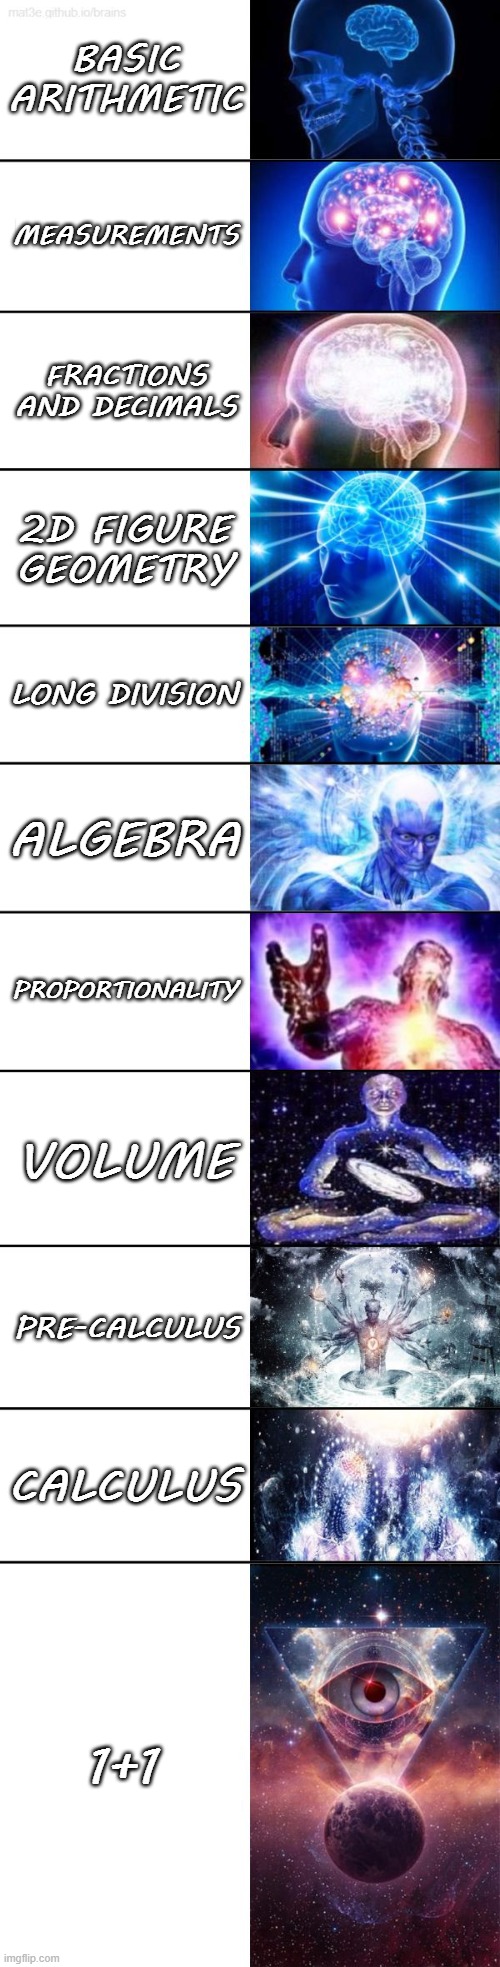 Difficult Math | BASIC ARITHMETIC; MEASUREMENTS; FRACTIONS AND DECIMALS; 2D FIGURE GEOMETRY; LONG DIVISION; ALGEBRA; PROPORTIONALITY; VOLUME; PRE-CALCULUS; CALCULUS; 1+1 | image tagged in extended expanding brain | made w/ Imgflip meme maker